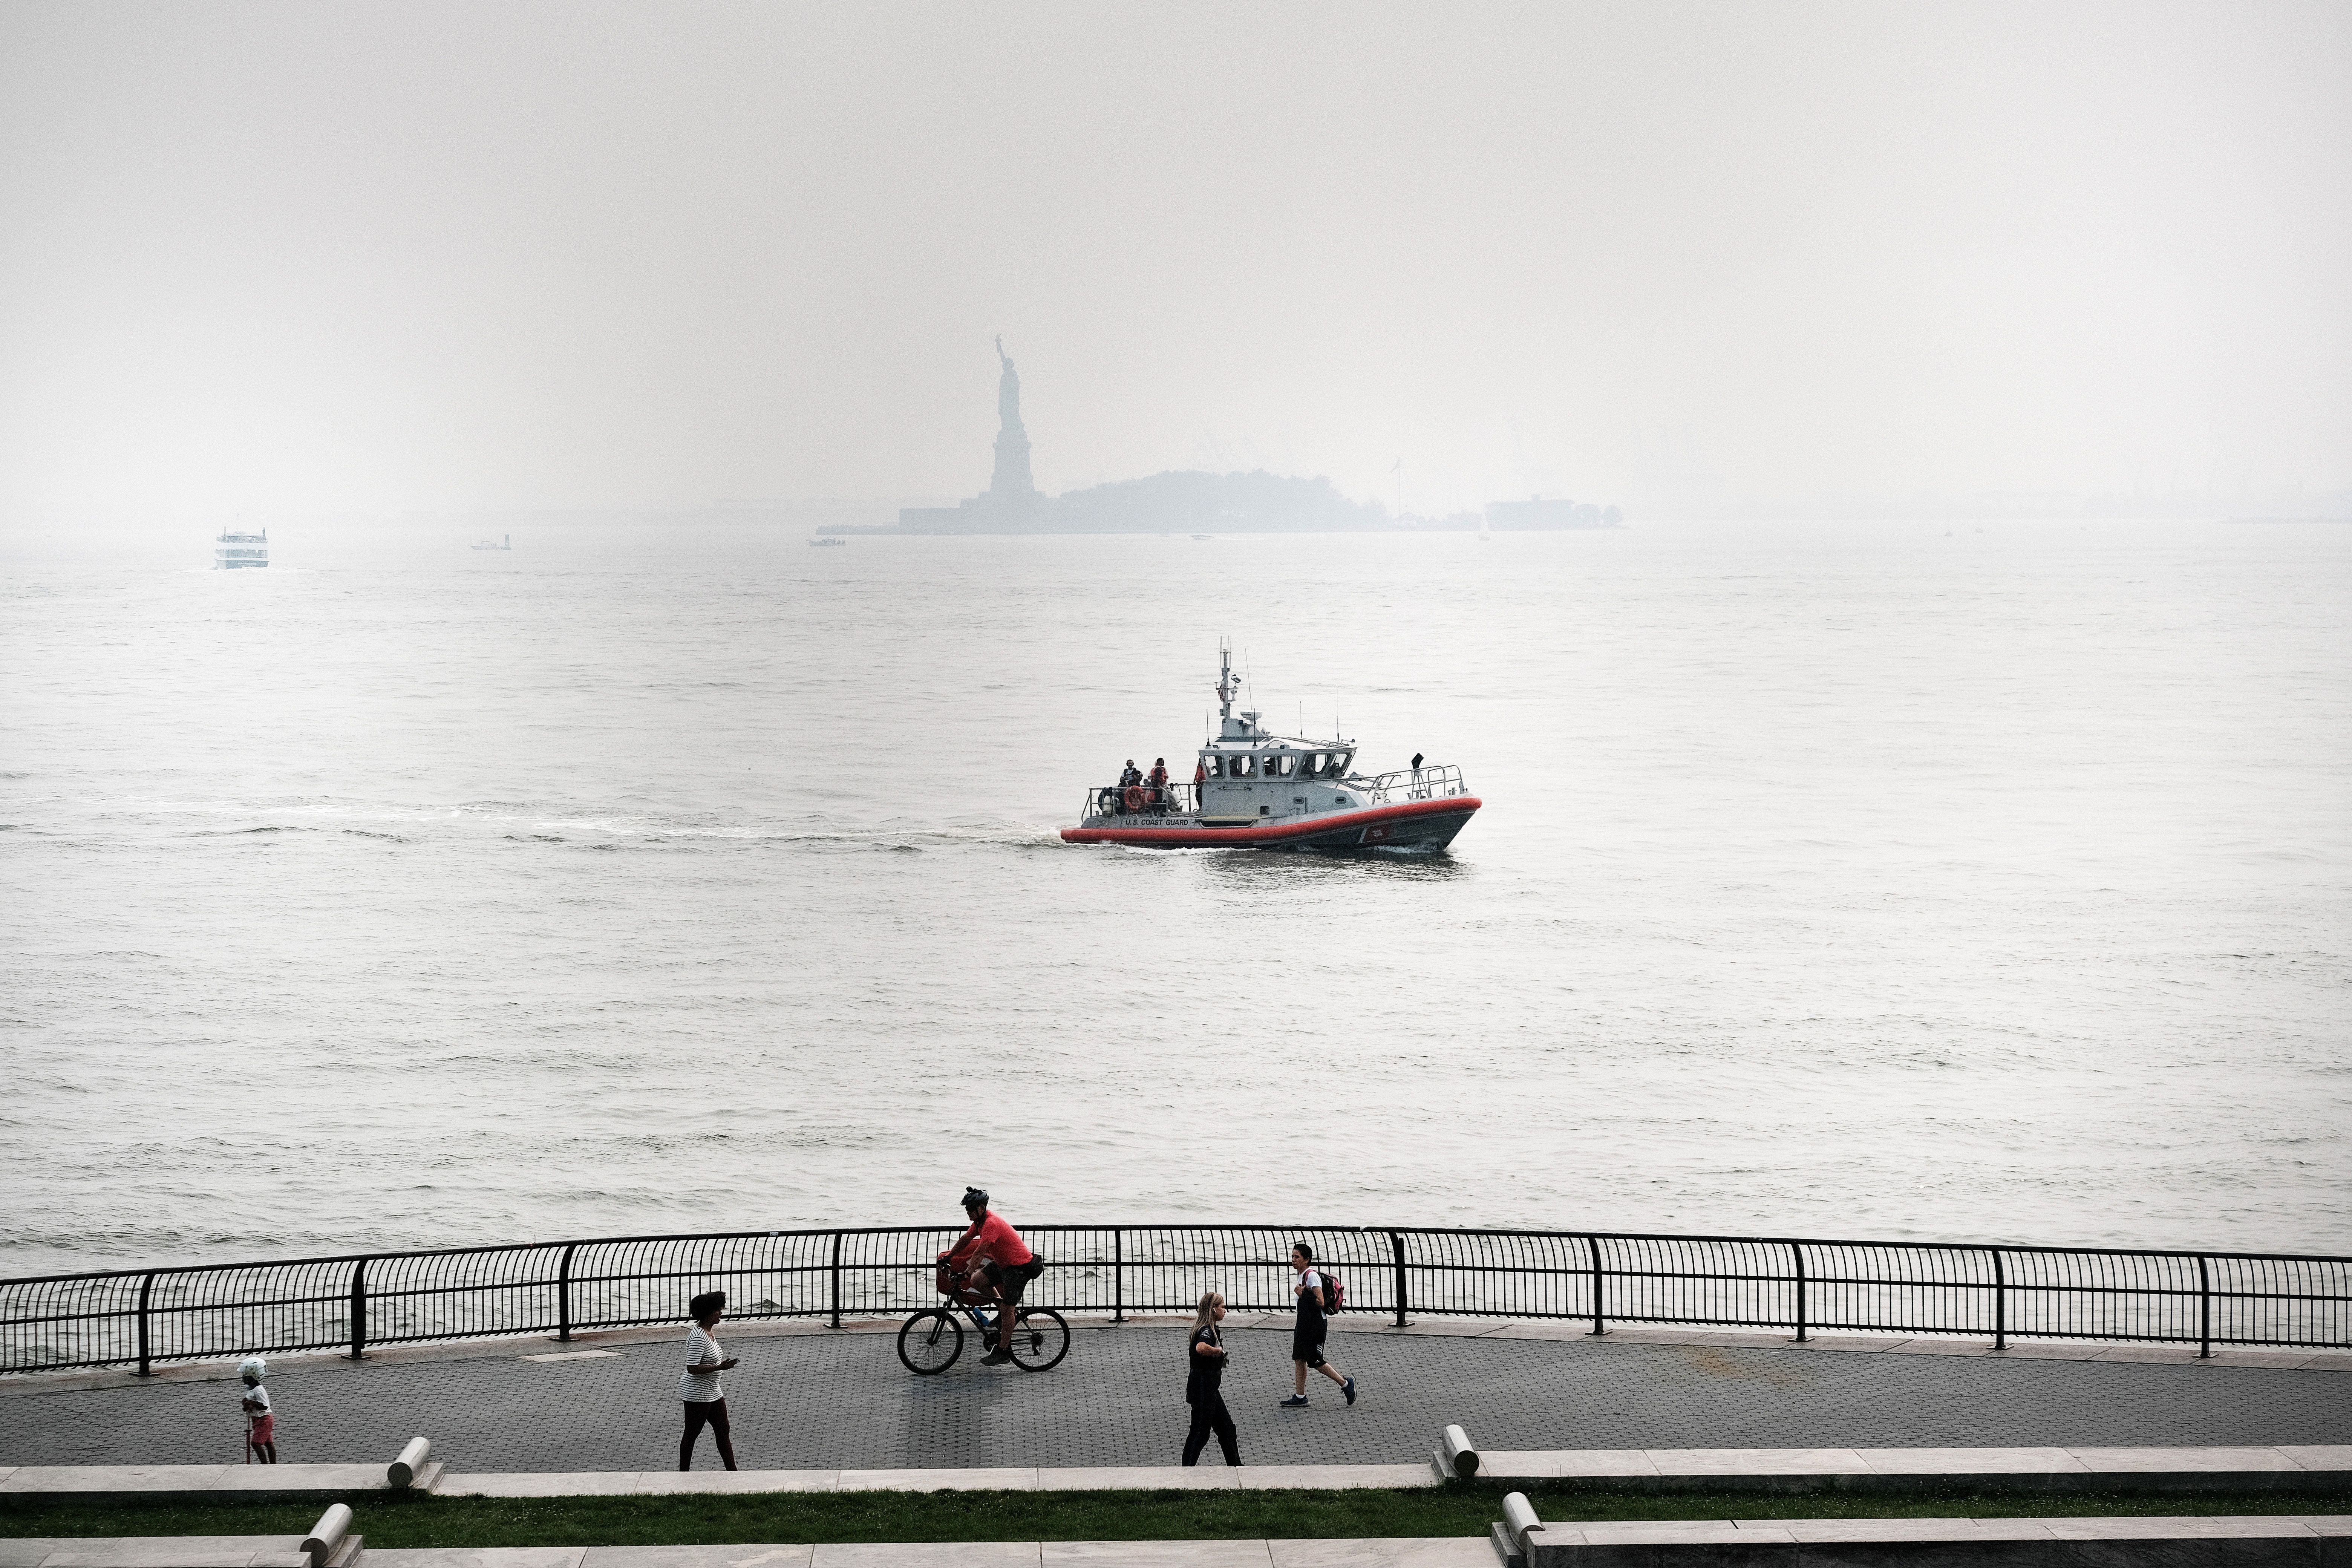 The Statue of Liberty barely visible in the distance in New York City on July 20.